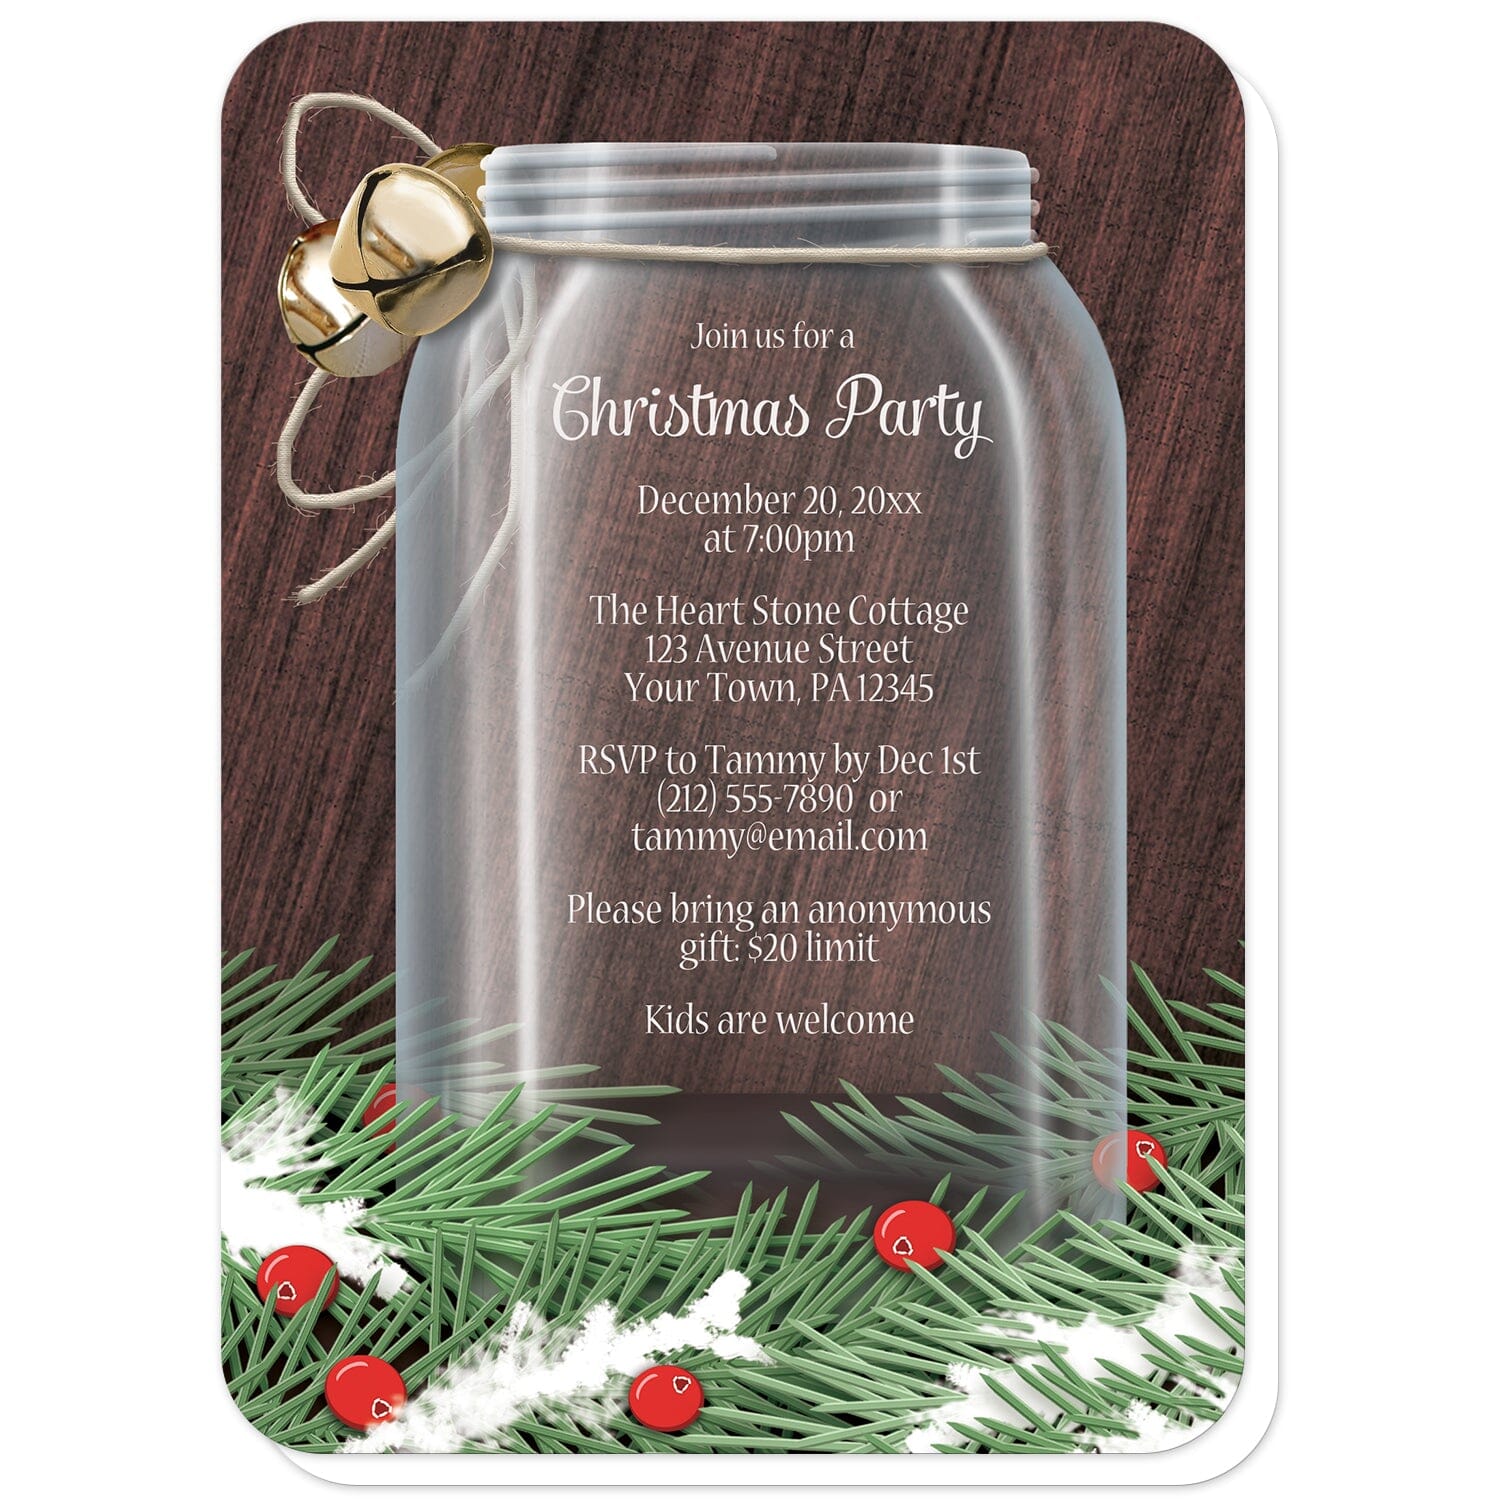 Winter Mason Jar Pine Boughs Christmas Party Invitations (with rounded corners) at Artistically Invited. Rustic holiday-themed winter mason jar pine boughs Christmas party invitations designed with a glass mason jar illustration with twine and jingle bells tied around the top of the jar and pine boughs and cranberries along the bottom over a dark wood design. Your personalized Christmas party details are custom printed in white over the mason jar area of the design.